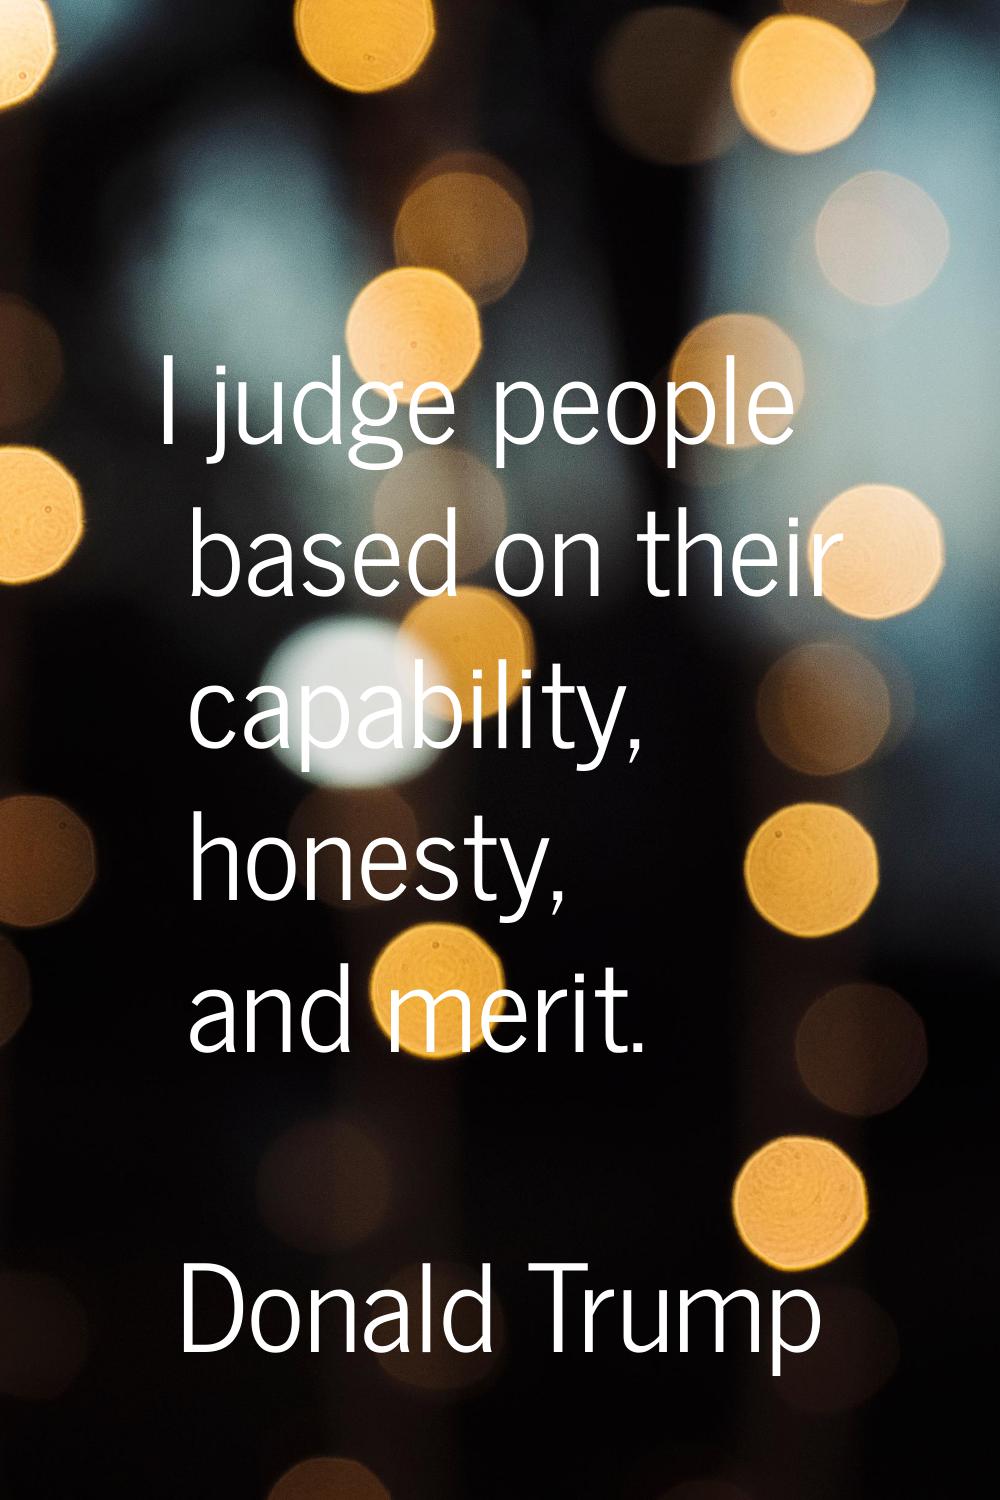 I judge people based on their capability, honesty, and merit.